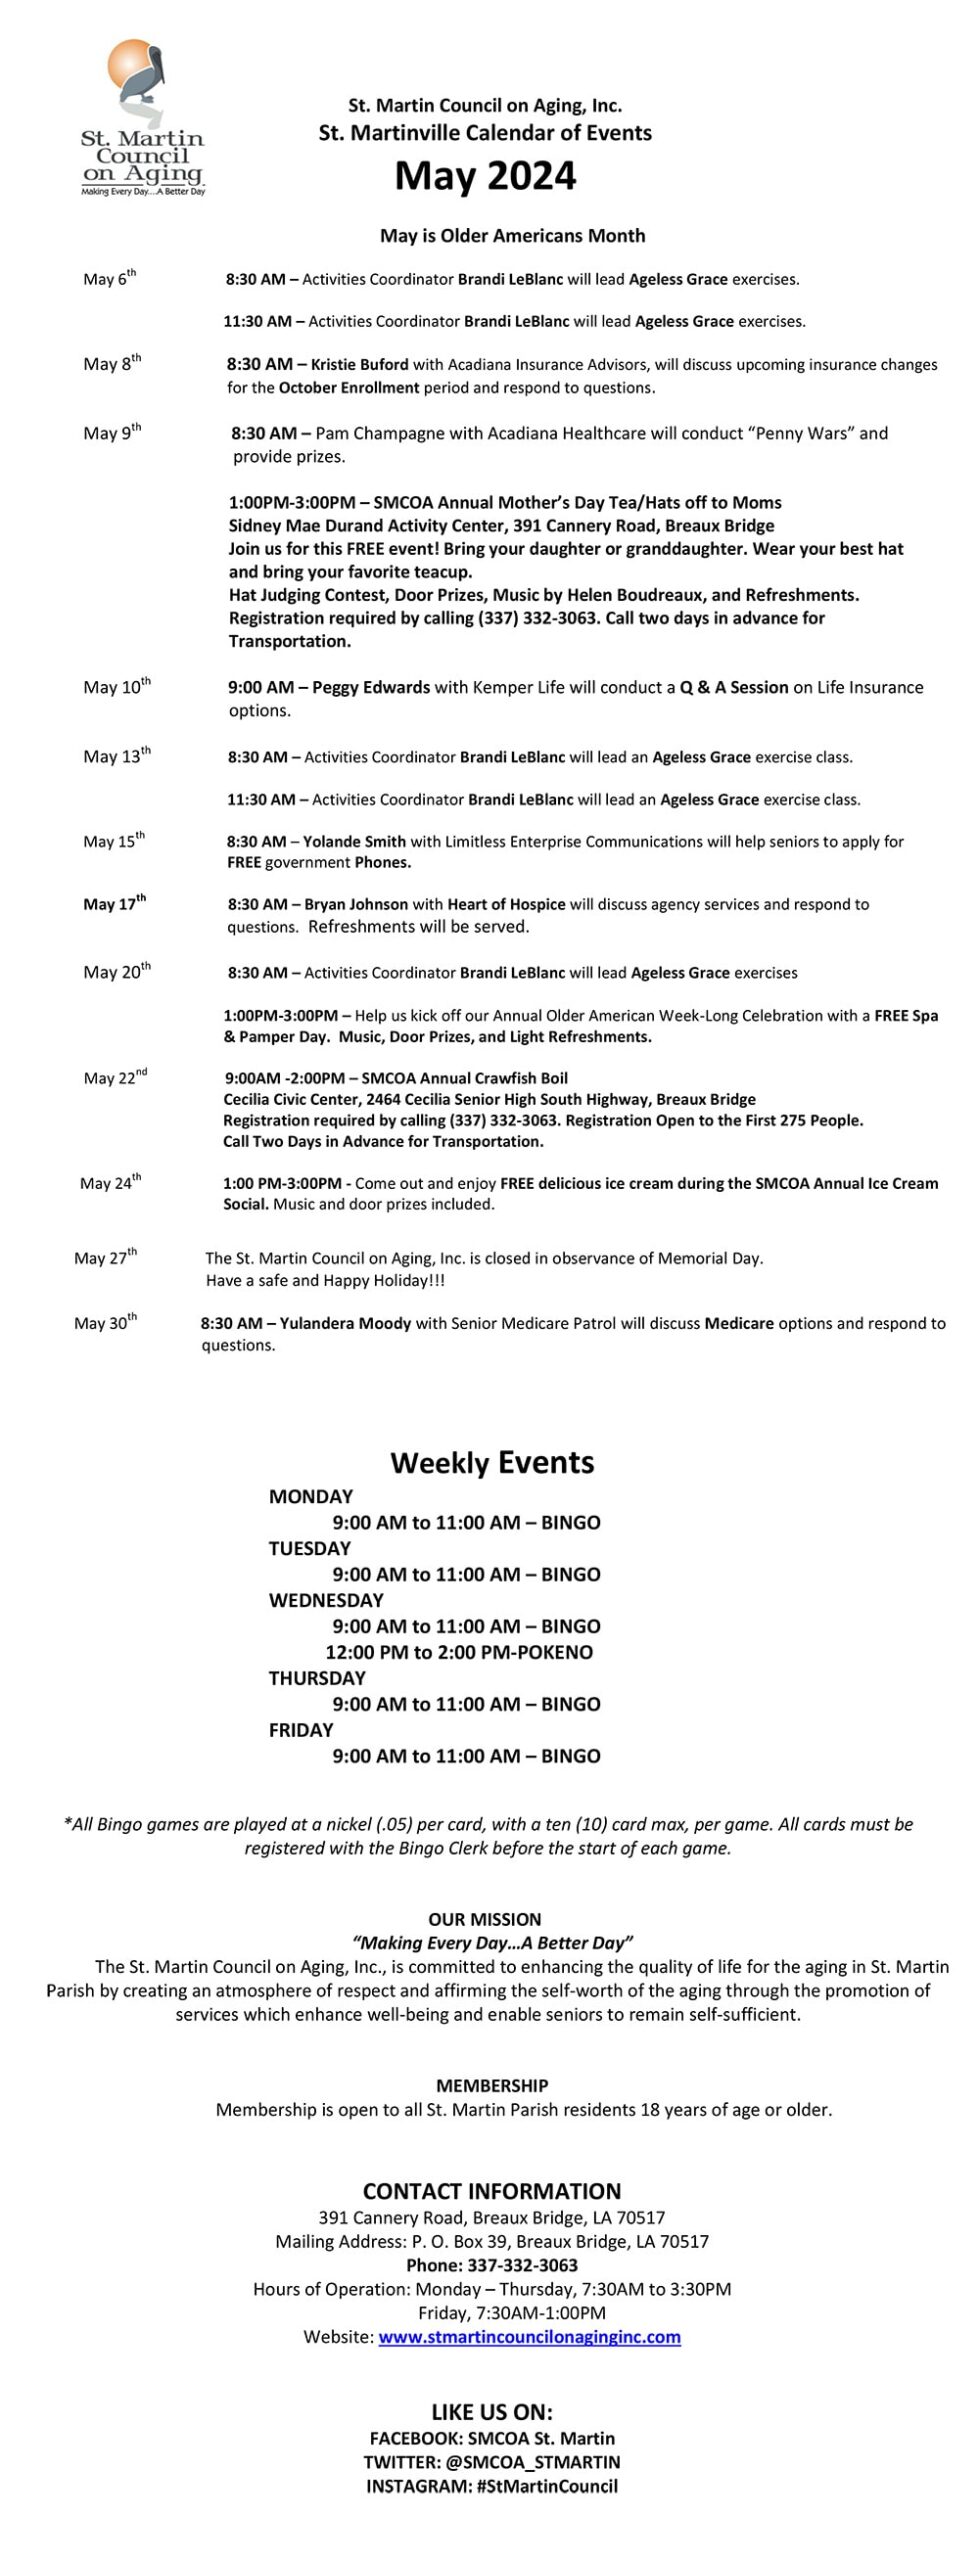 St. Martin Council on Aging, Inc. St. Martinville Calendar of Events May 2024